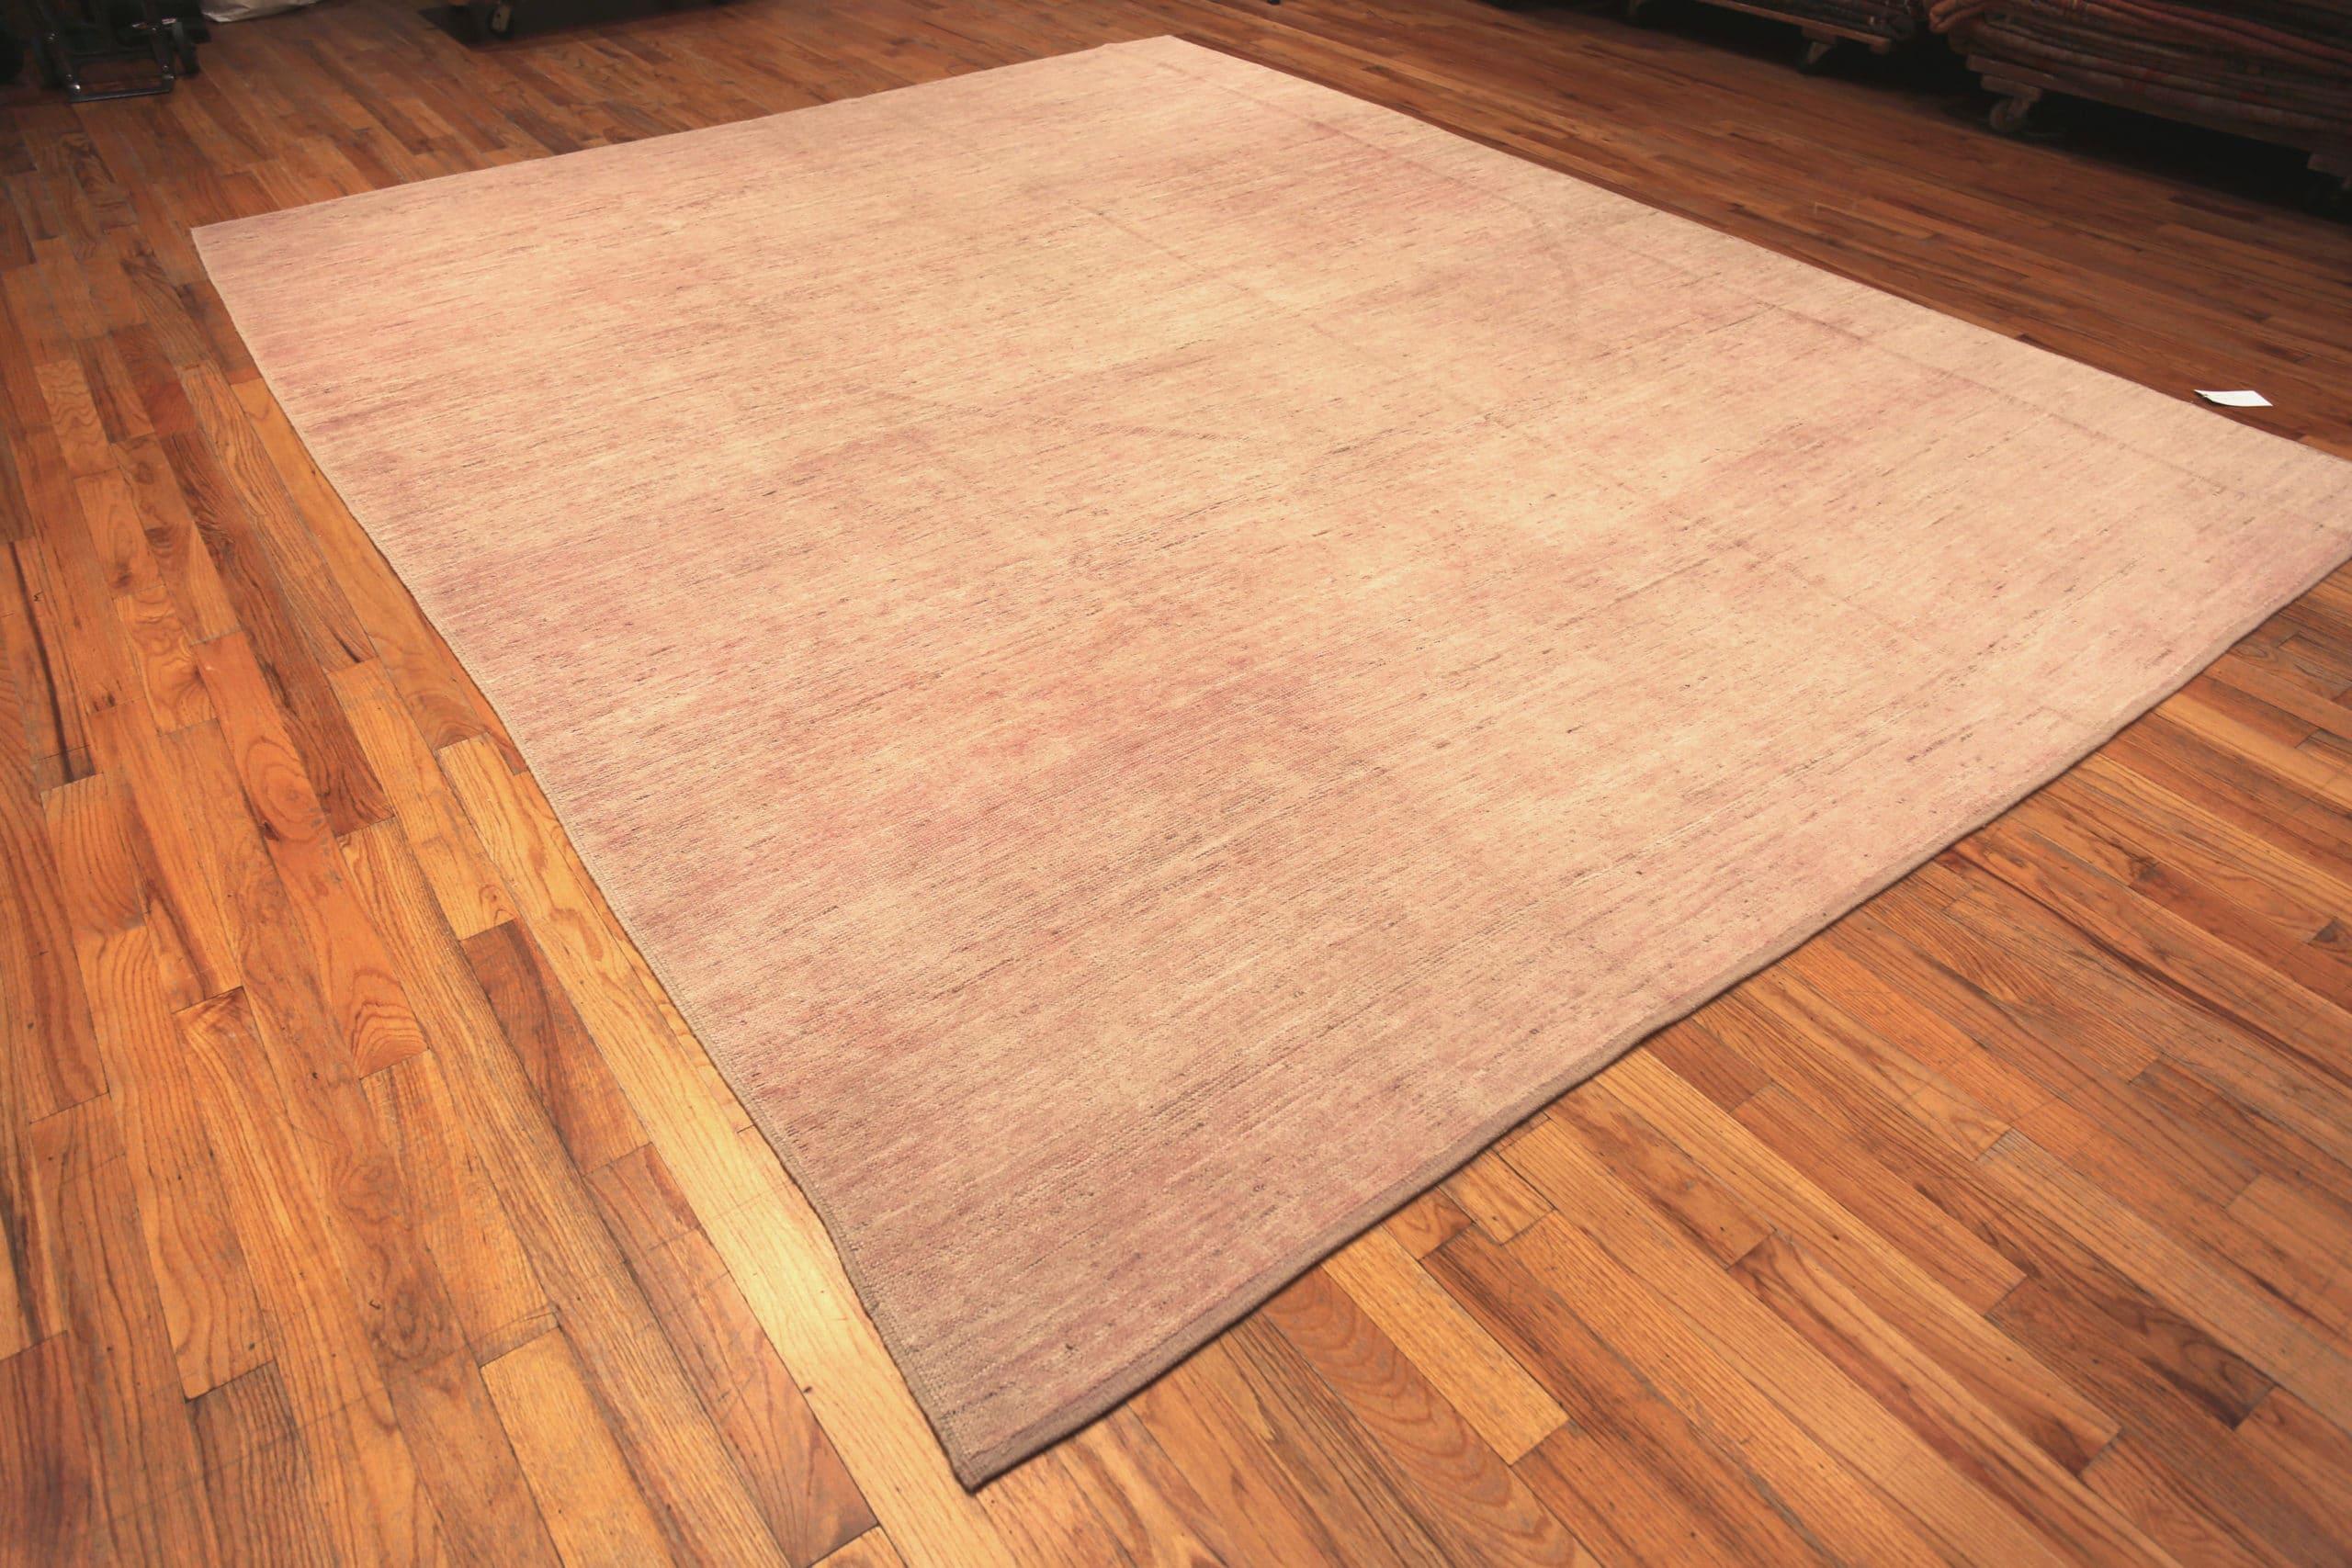 Nazmiyal Collection Chic Gentle Tone Modern Decorative Area Rug. Country of Origin: Central Asia, Circa date: Modern
 
